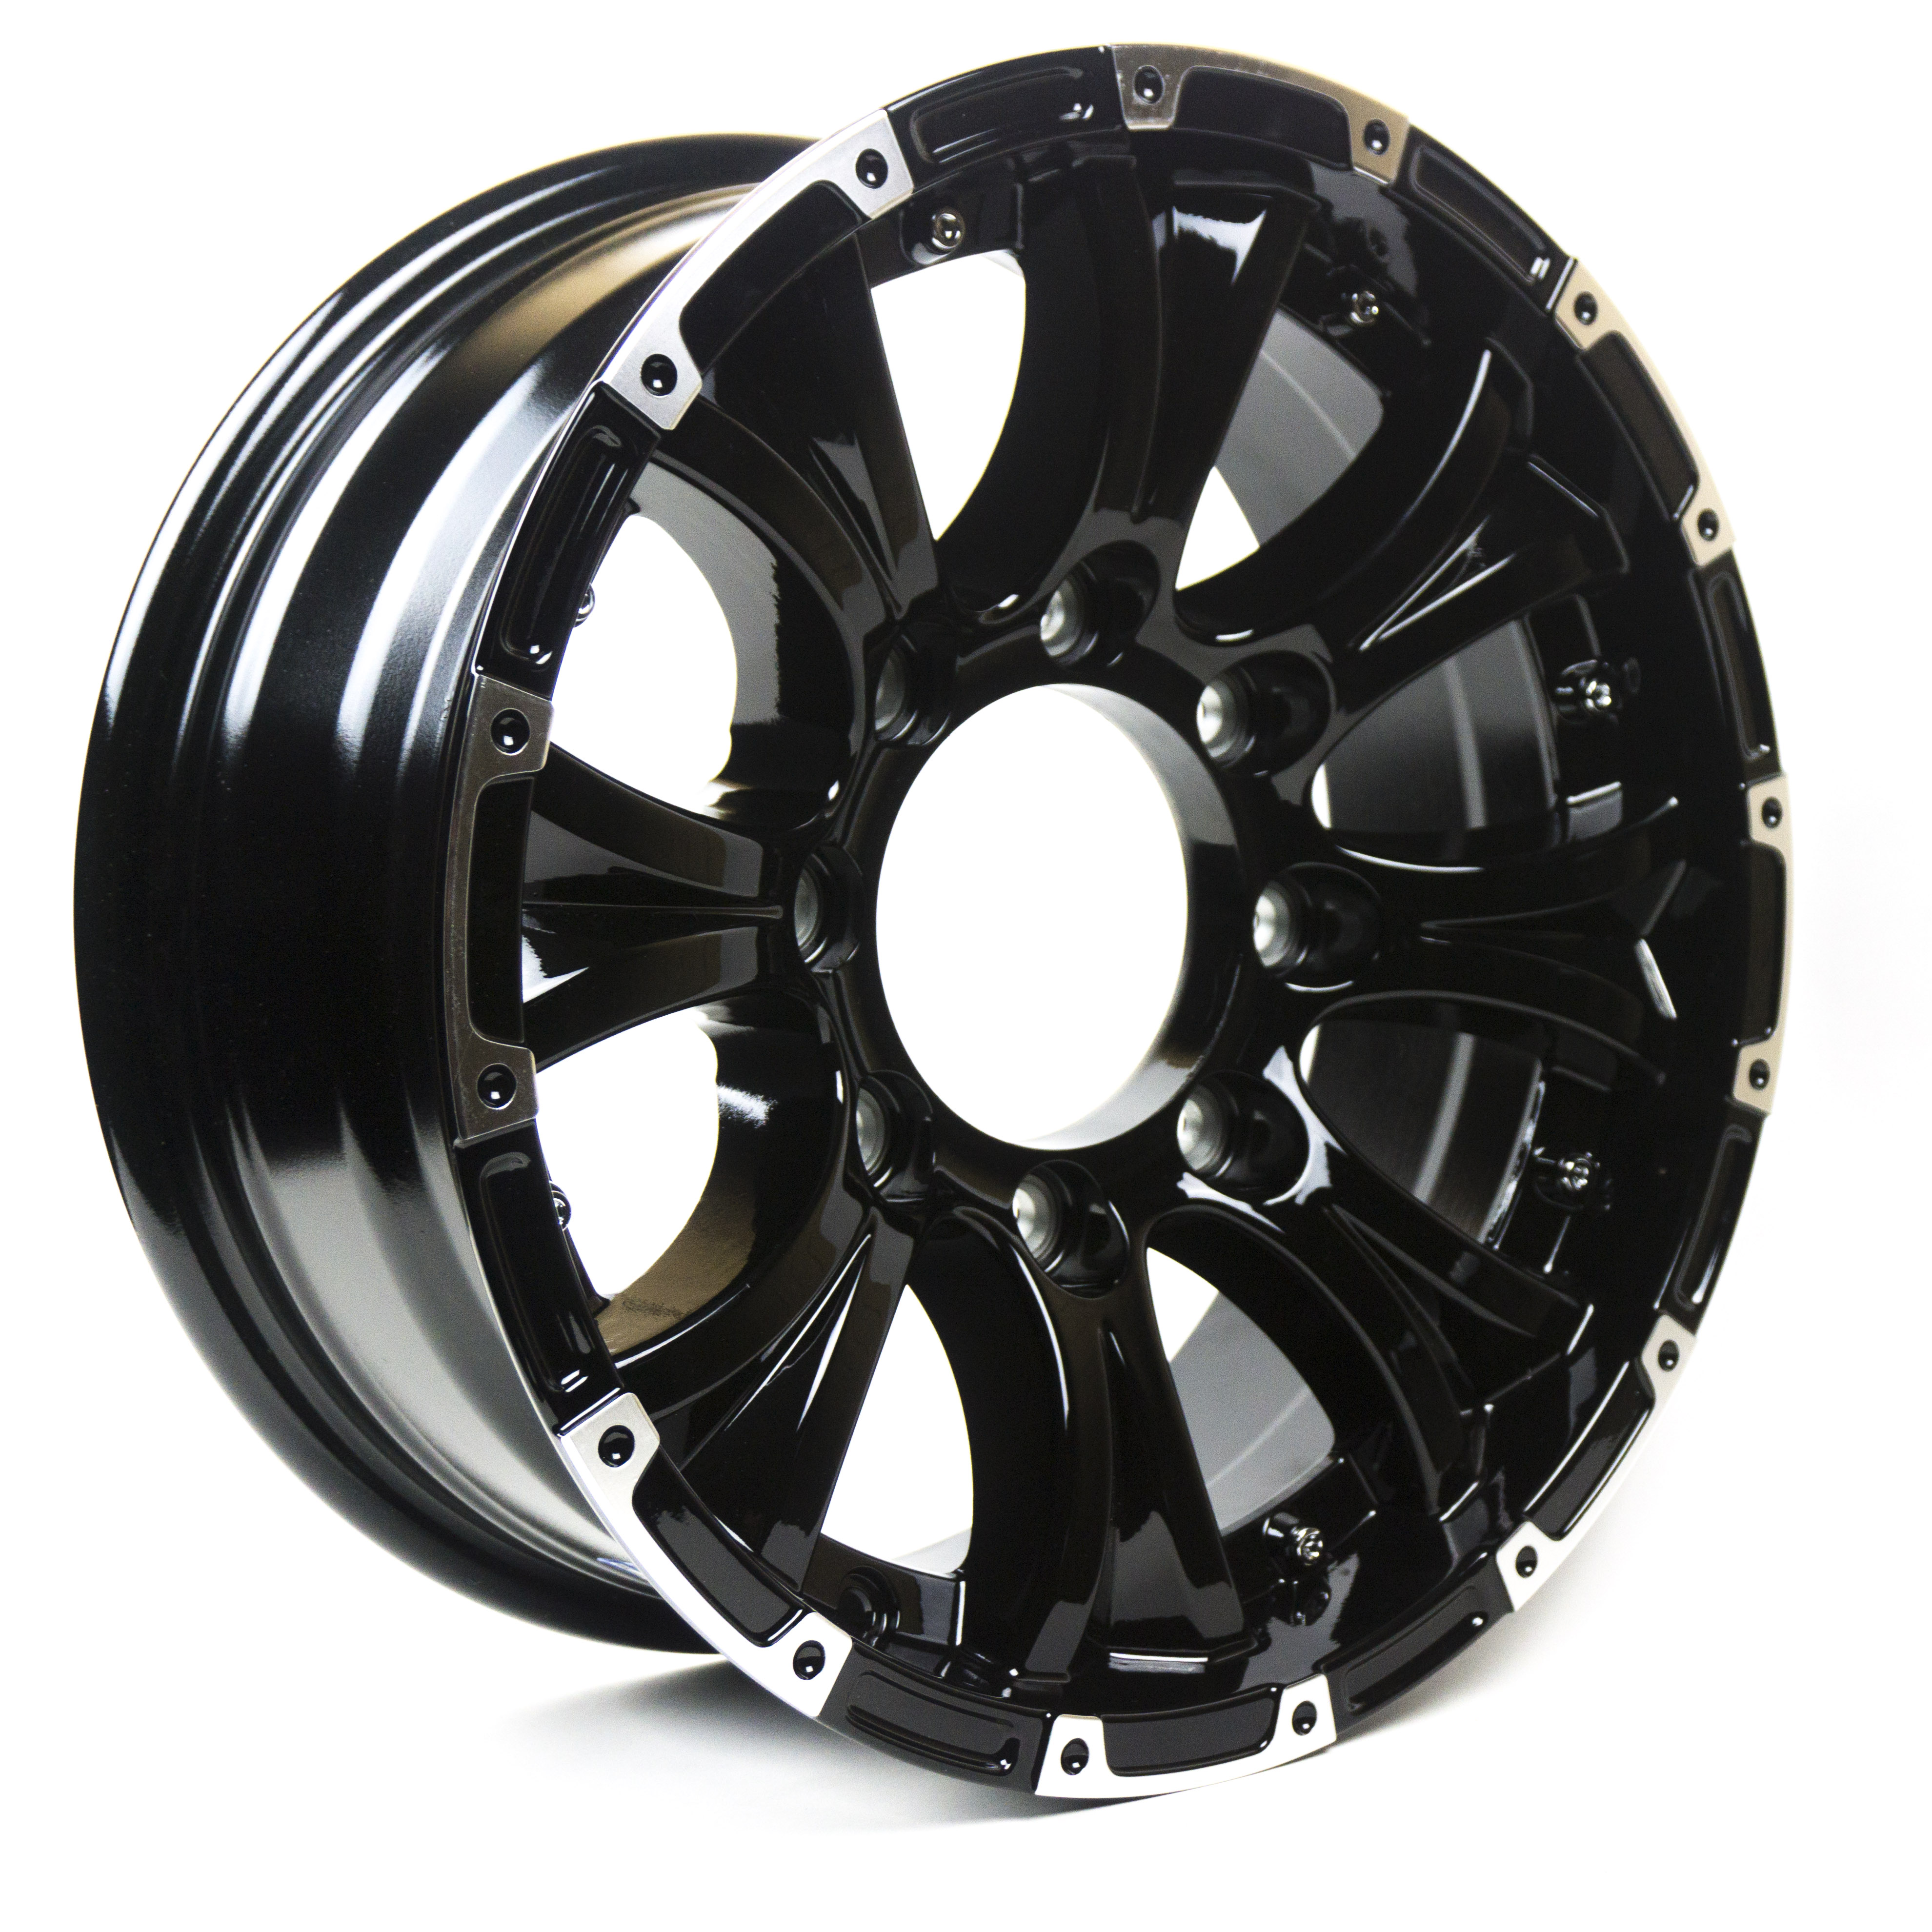 Viking Series Machined Lip Gloss Black Aluminum Trailer Wheel with Black Cap - 15" x 6" 6 On 5.5 - 2830 LB Load Carrying Capacity - 0 Offset - image 1 of 3